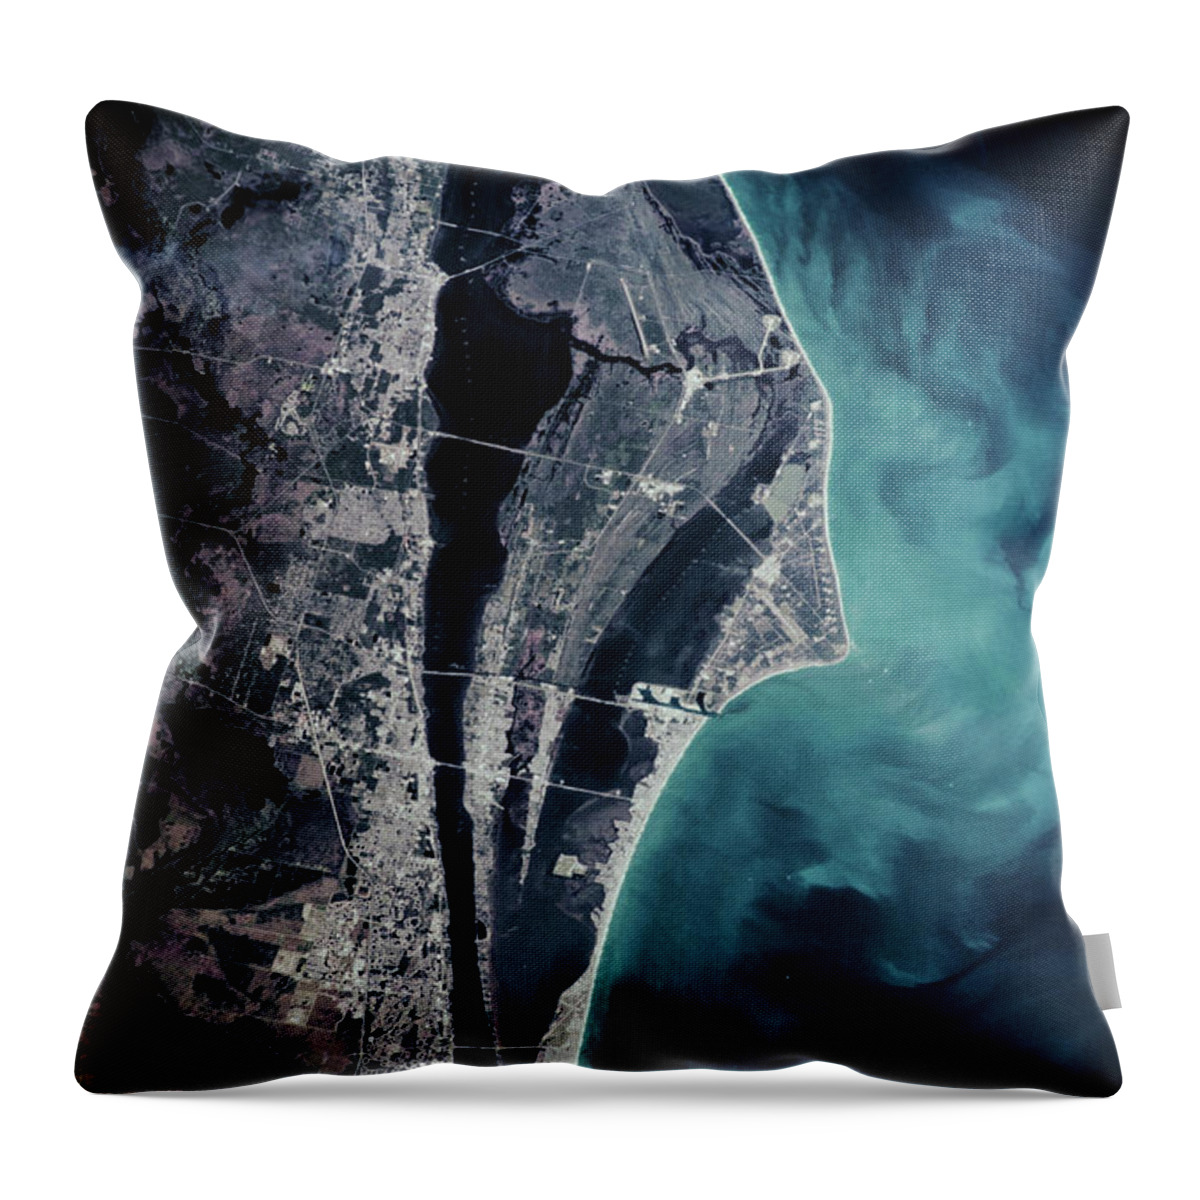 Photography Throw Pillow featuring the photograph Satellite View Of Cape Canaveral by Panoramic Images